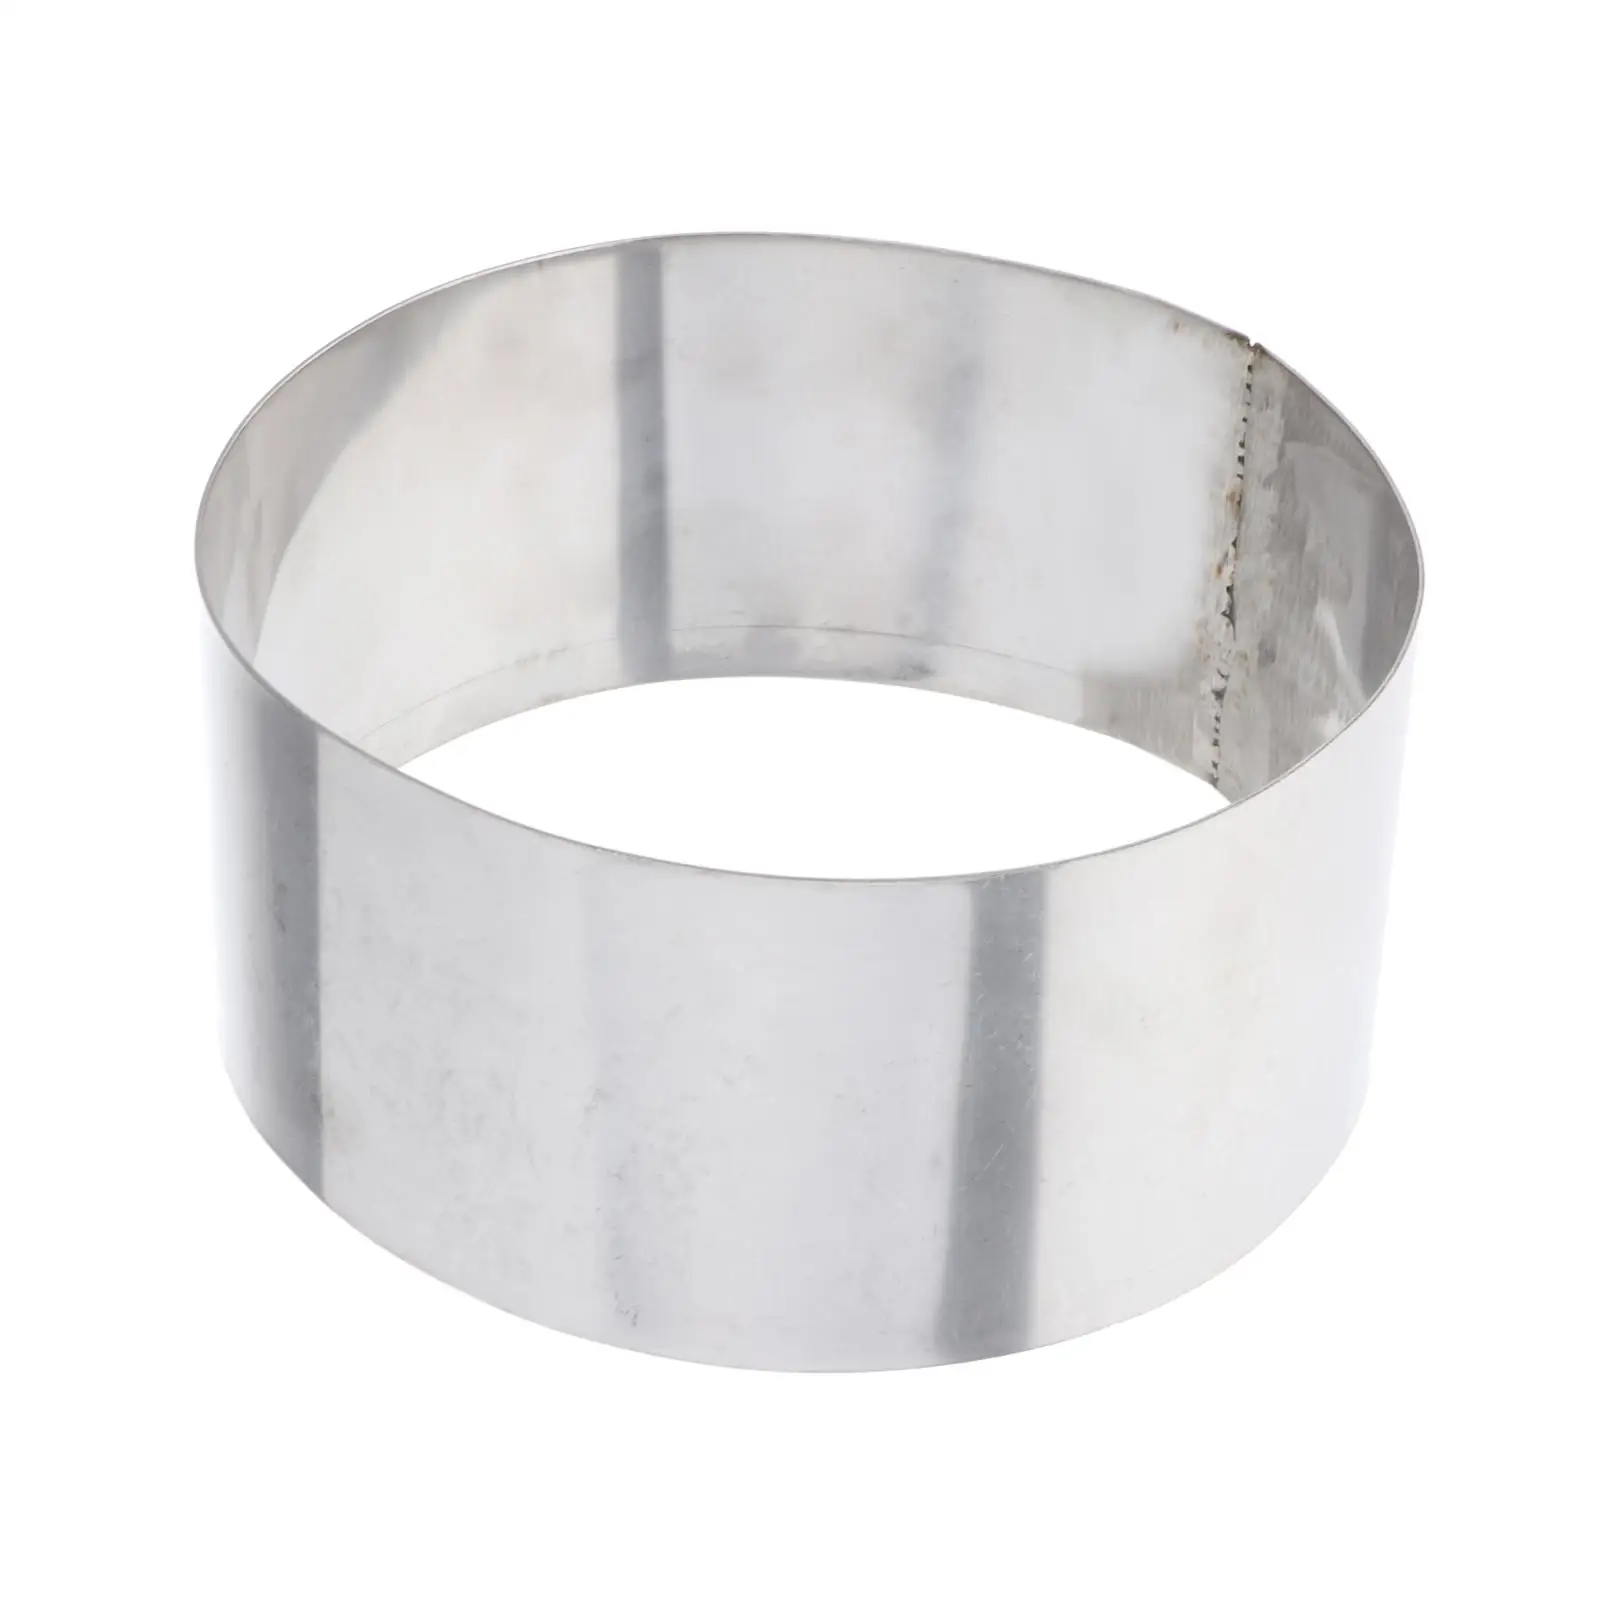 New Stainless Ring Replacement 59496-373 for PWC 900 1100 STX STX-12F